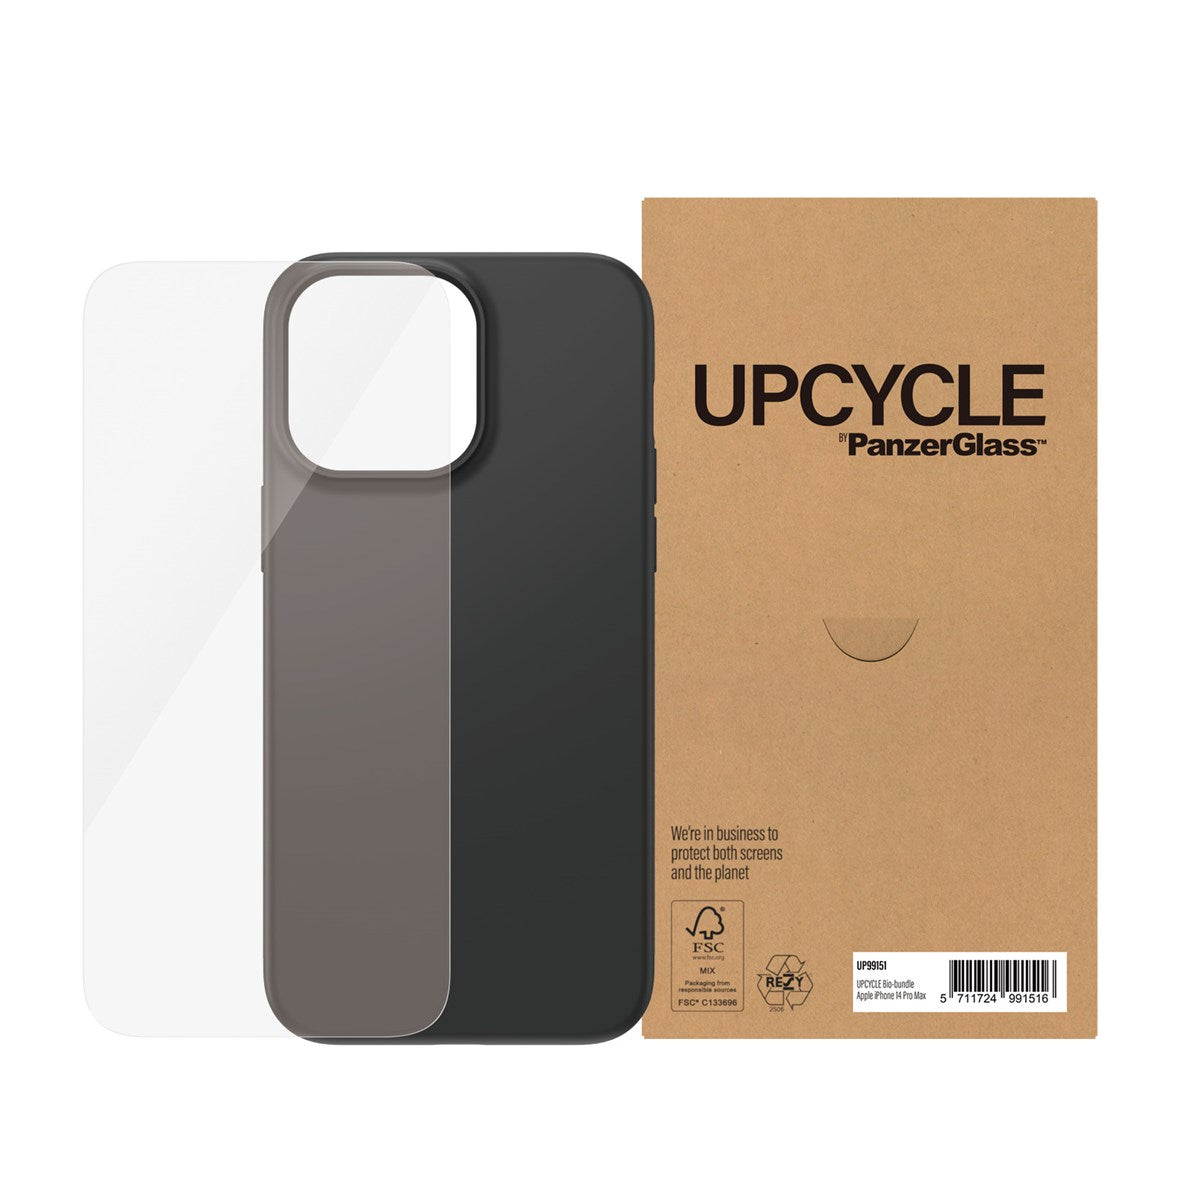 Upcycle by PanzerGlass Case and Screen Protector For iPhone 14 Pro Max Clear New - Sealed